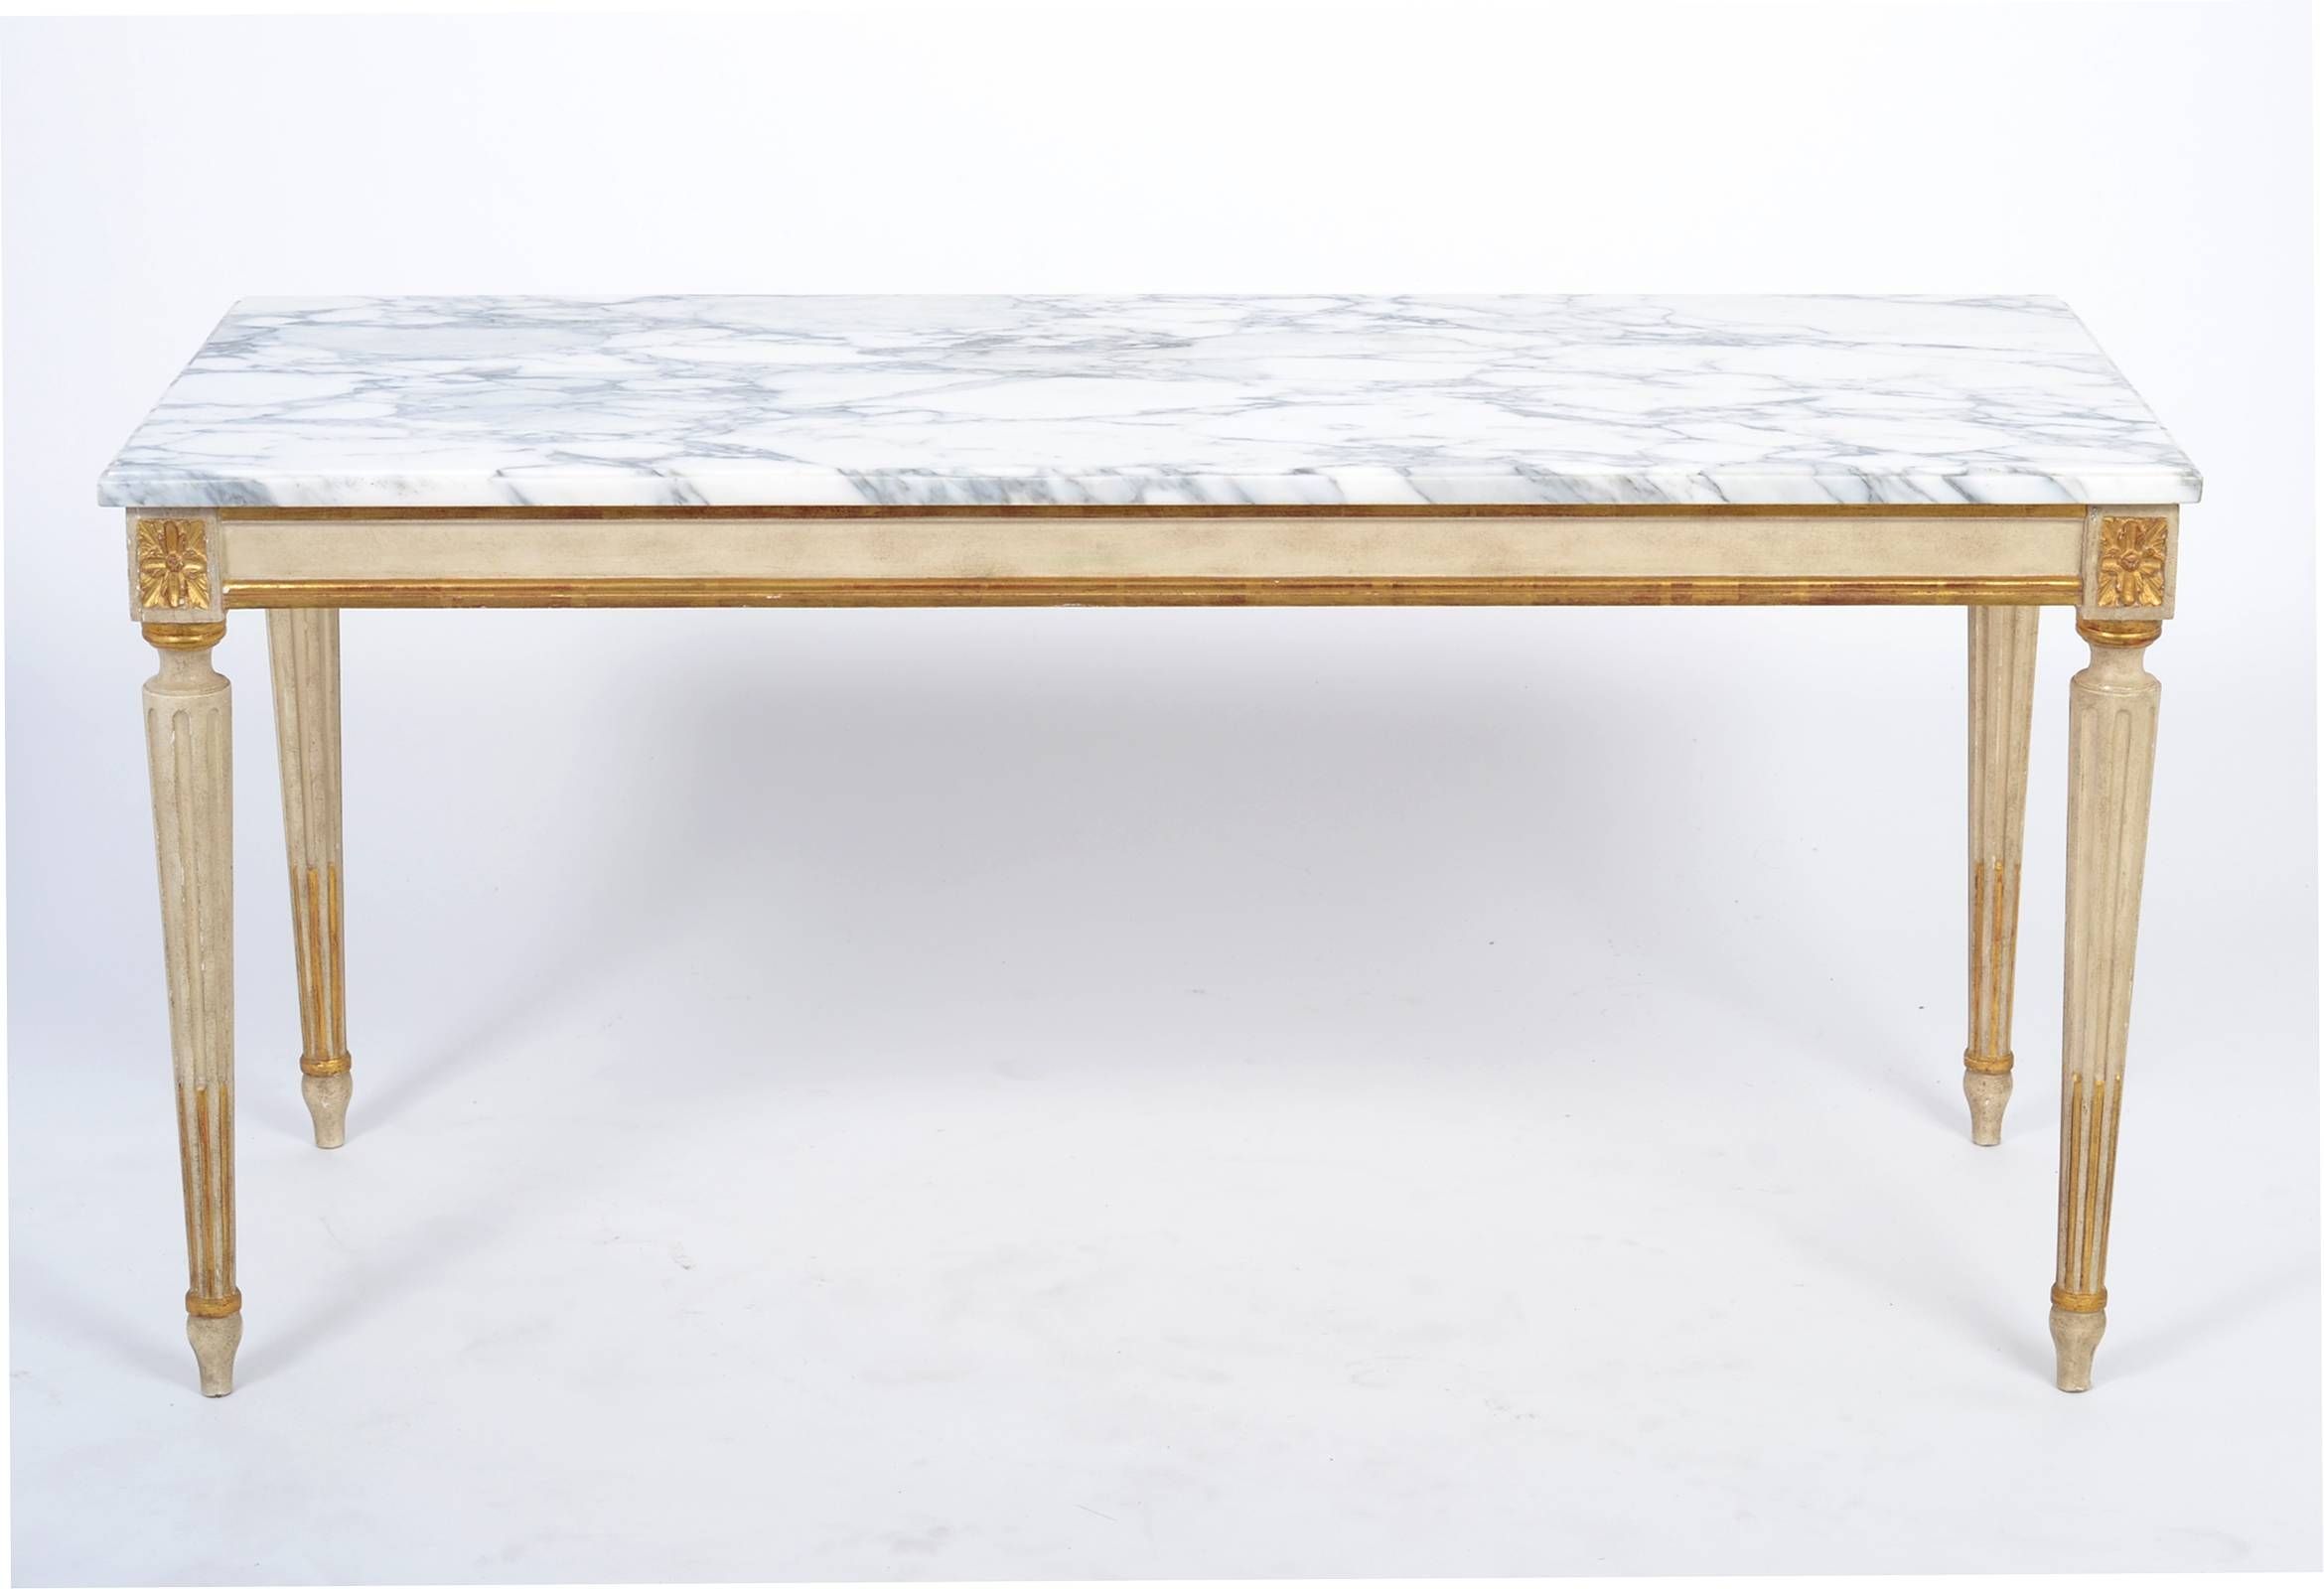 Louis Xvi Carrara Marble Top Coffee Table – Jean Marc Fray Intended For White Marble Coffee Tables (View 16 of 30)